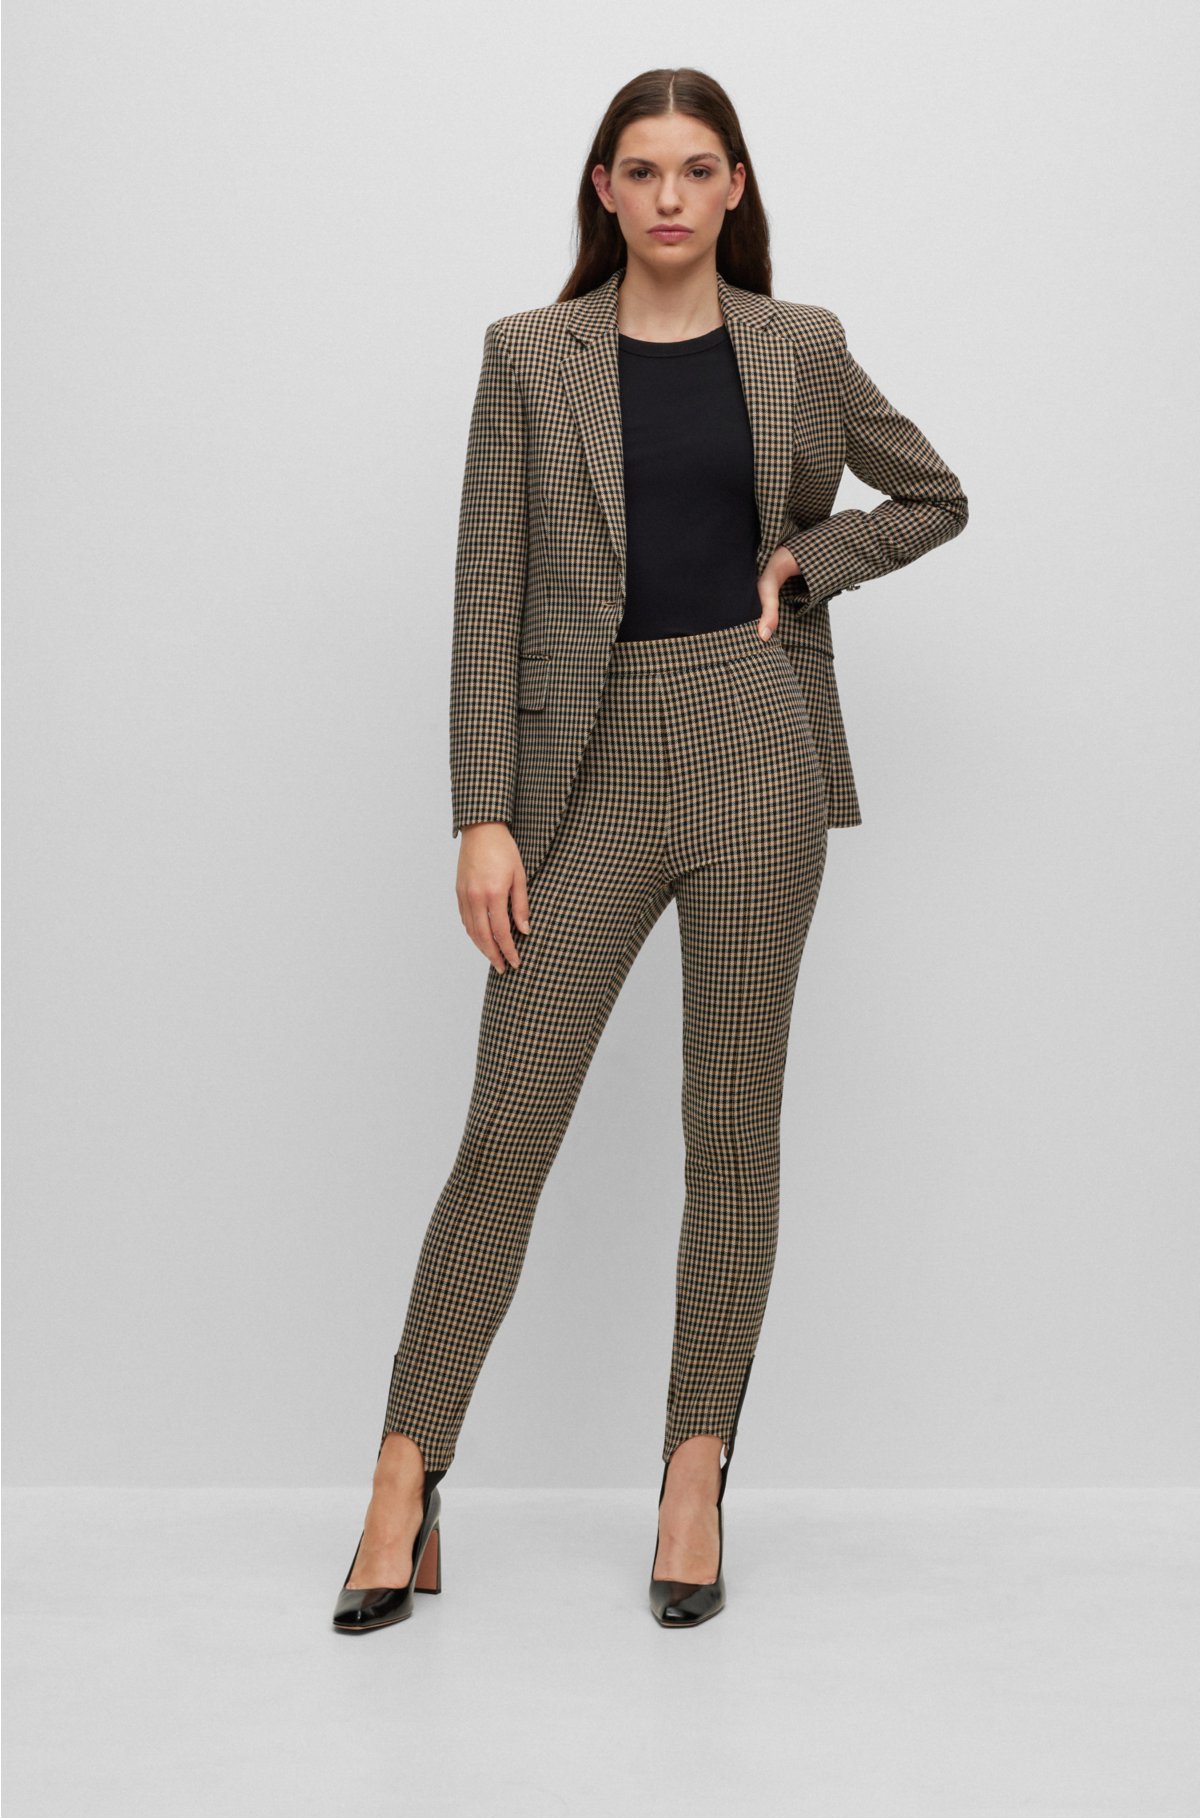 Womens Beige Brown Houndstooth Capri Leggings – Found By Me - Everyday  Clothing & Accessories